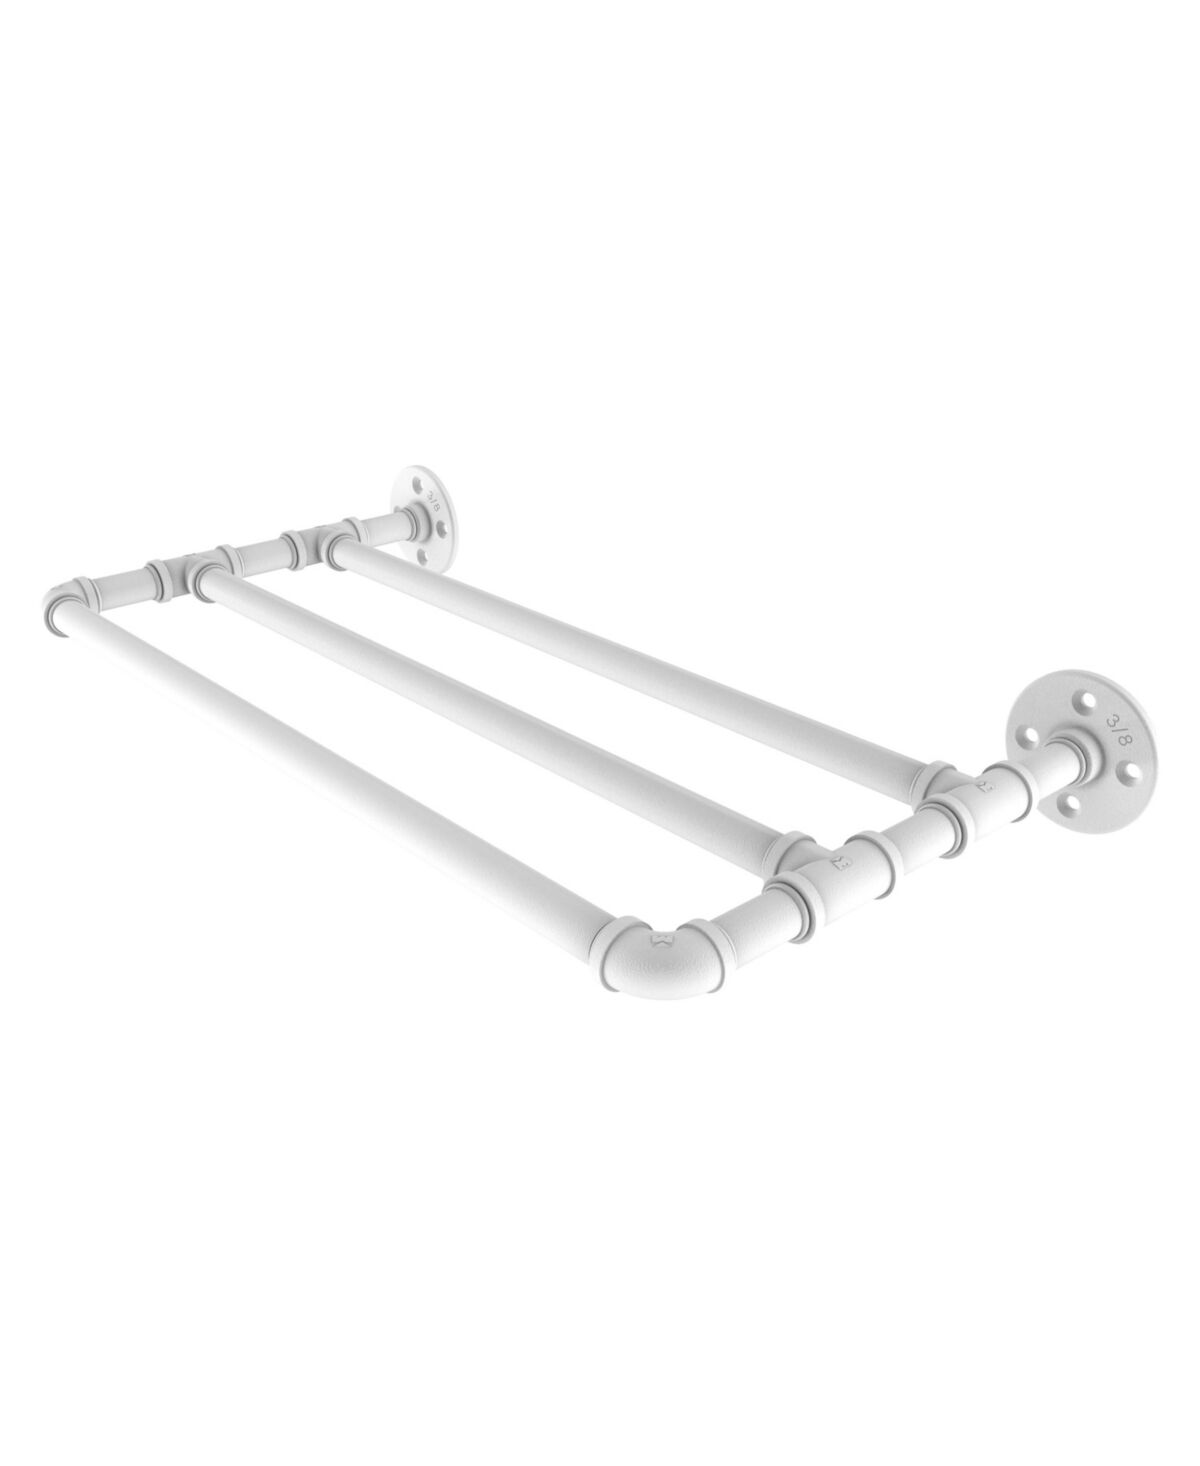 Allied Pipeline Collection 18 Inch Wall Mounted Towel Shelf - Matte white